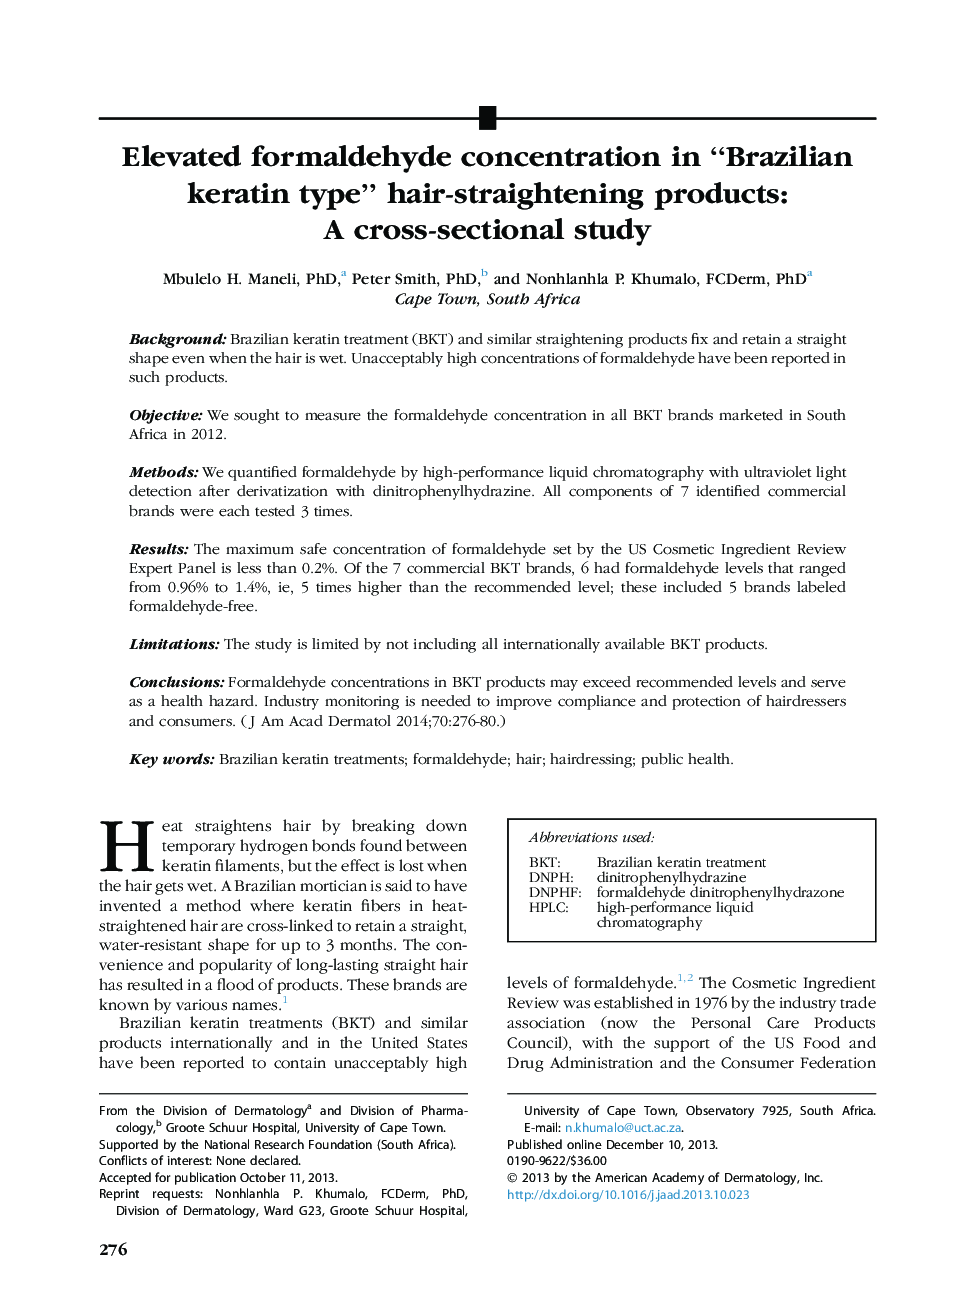 Elevated formaldehyde concentration in “Brazilian keratin type” hair-straightening products: AÂ cross-sectional study